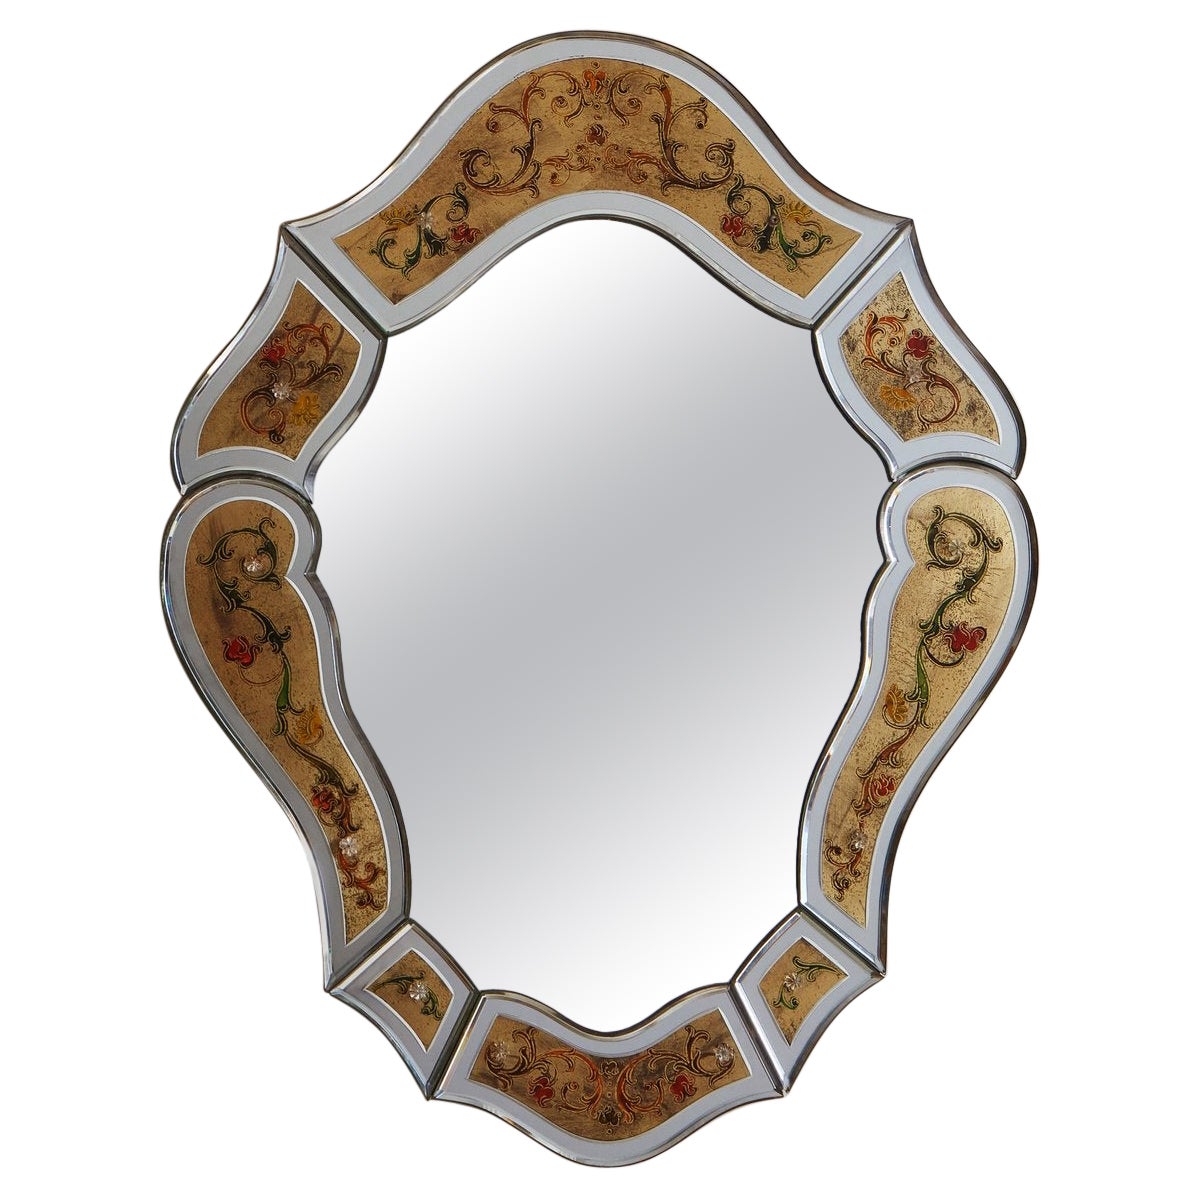 Eglomisé Venetian Mirror with Floral Details, Italy, 20th Century